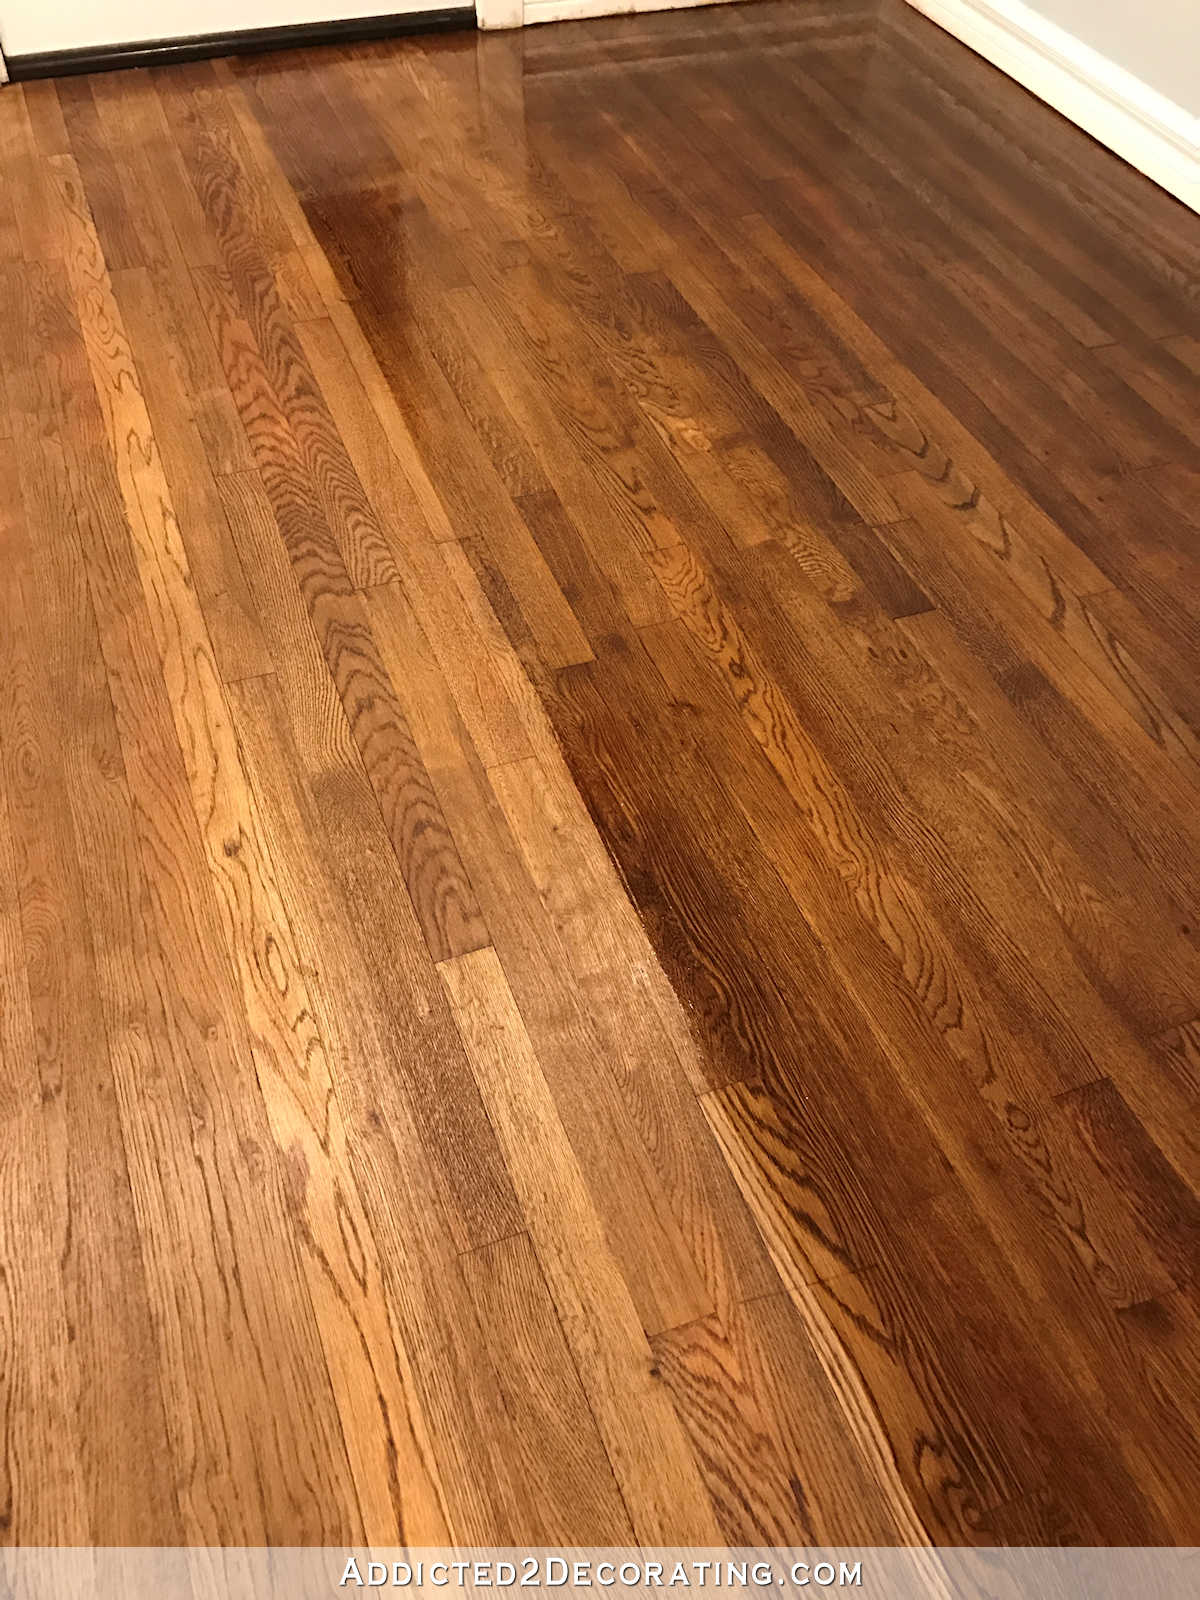 refinishing red oak hardwood floors - adding stain to first coat of polyurethane to darken the color - 2